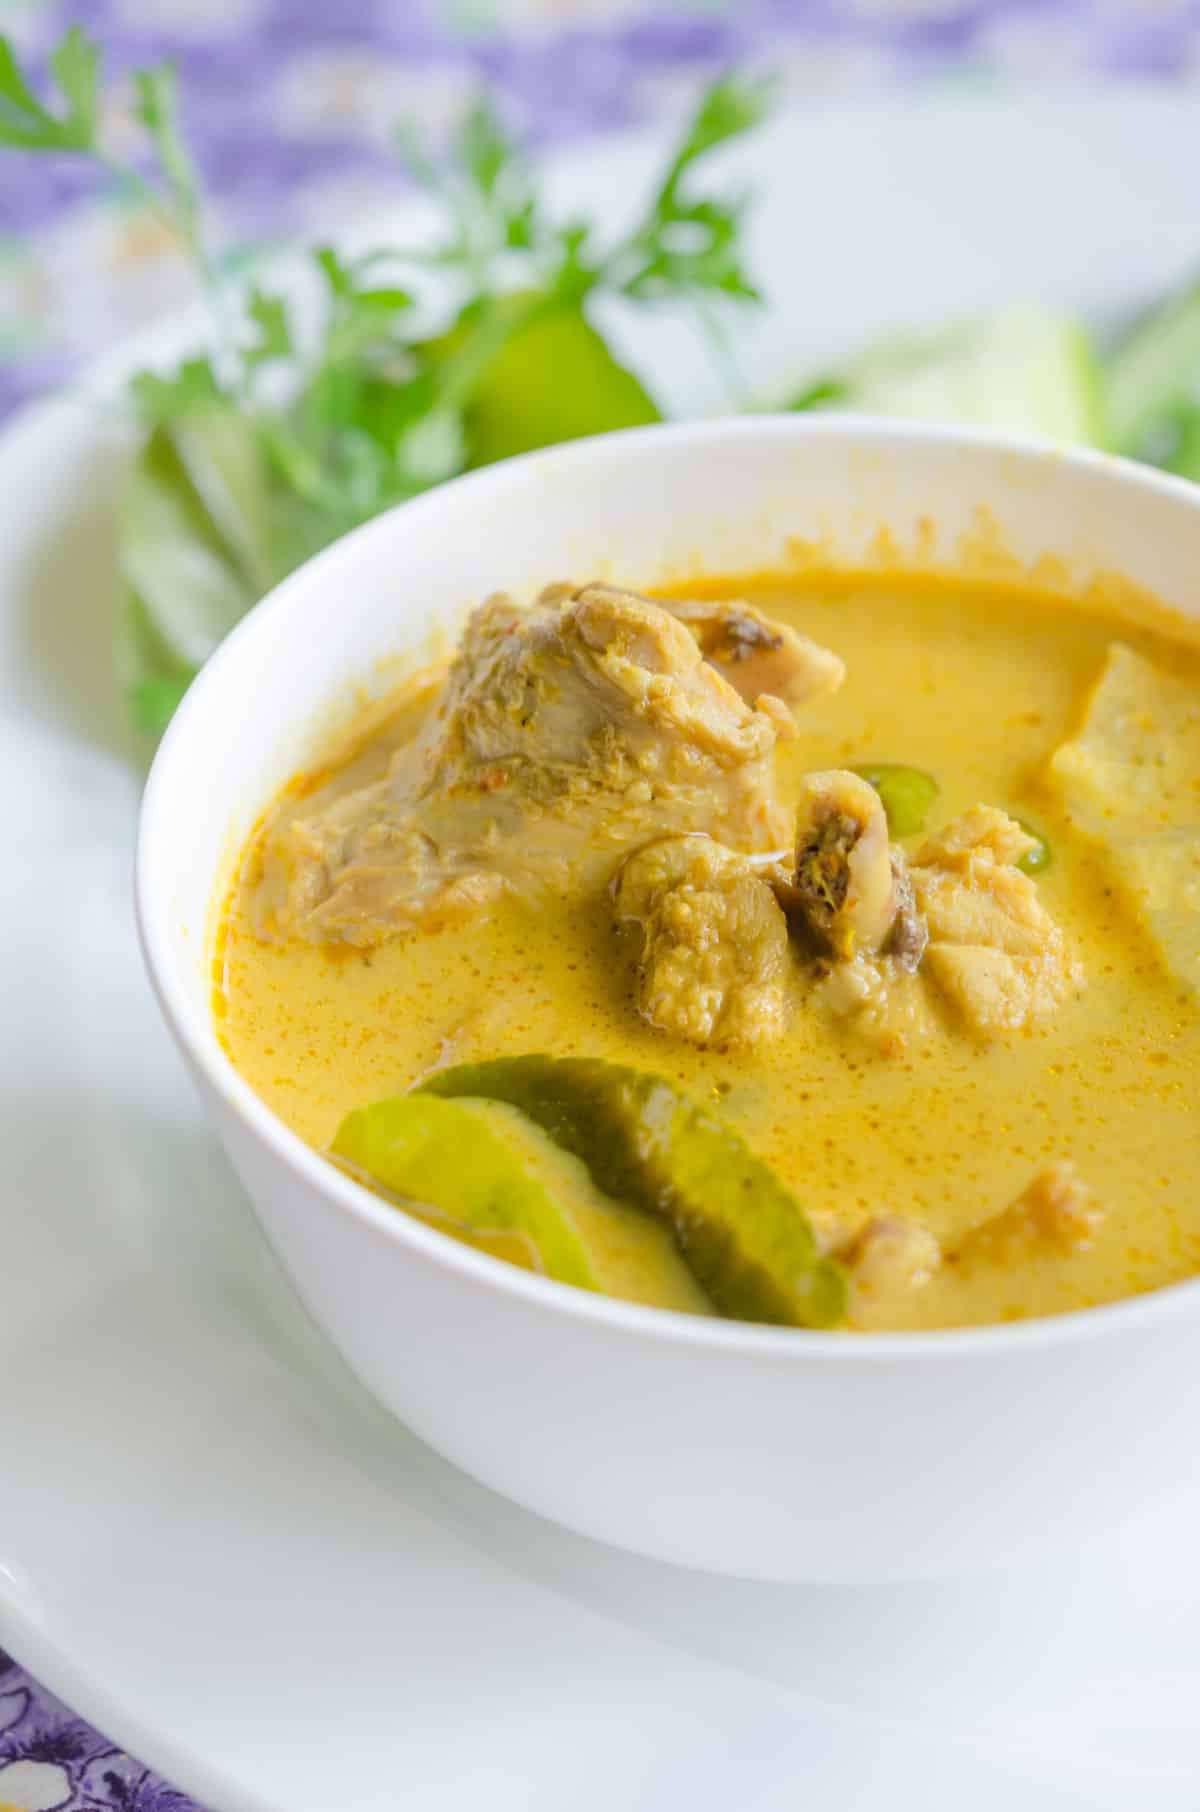 Thai yellow curry with chicken, The colour comes from turmeric,